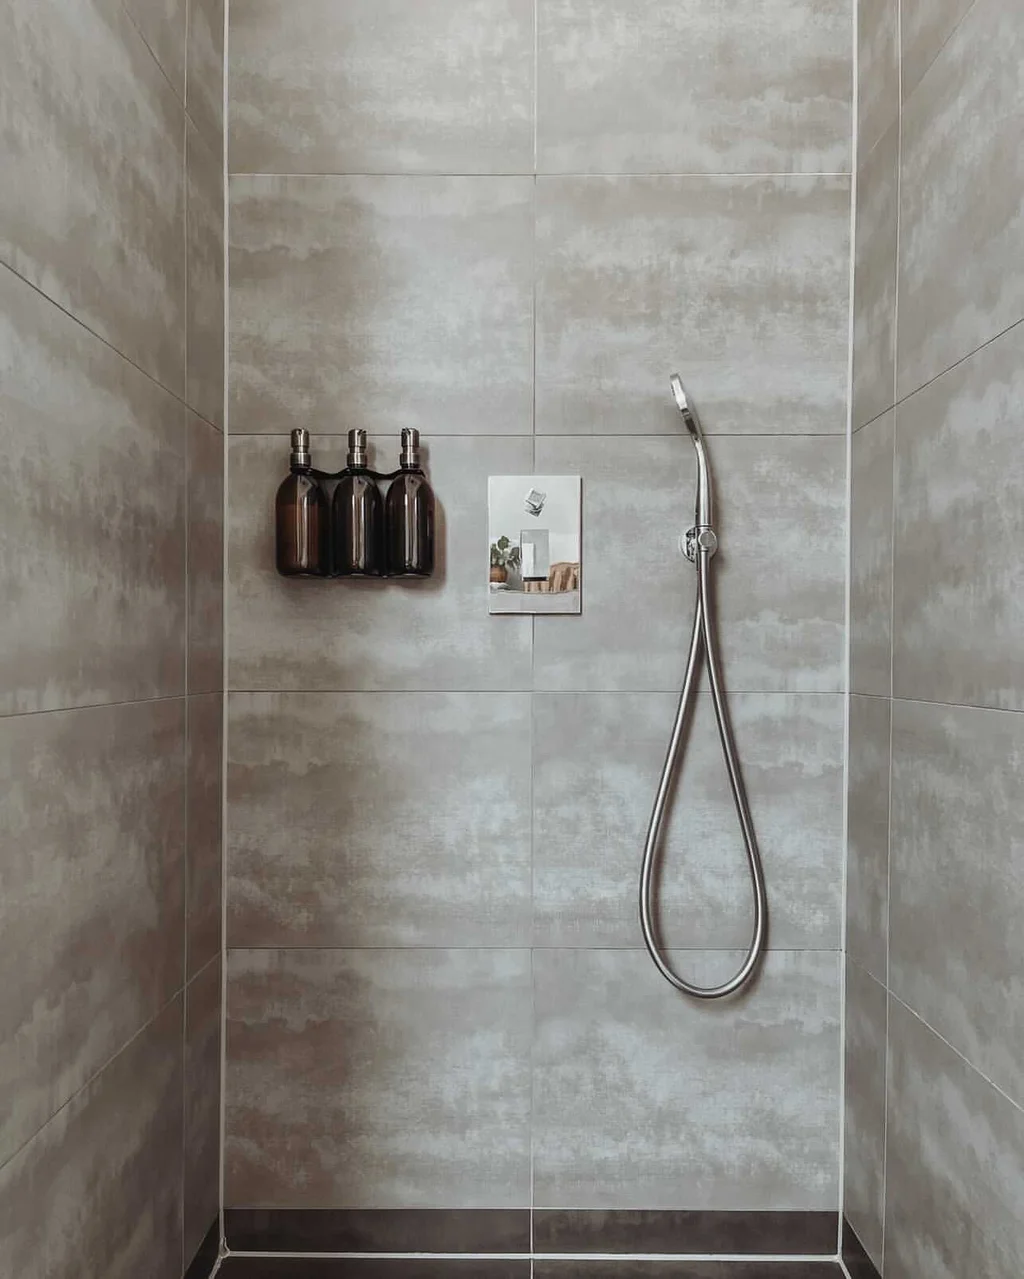 wall mounted soap dispenser in shower